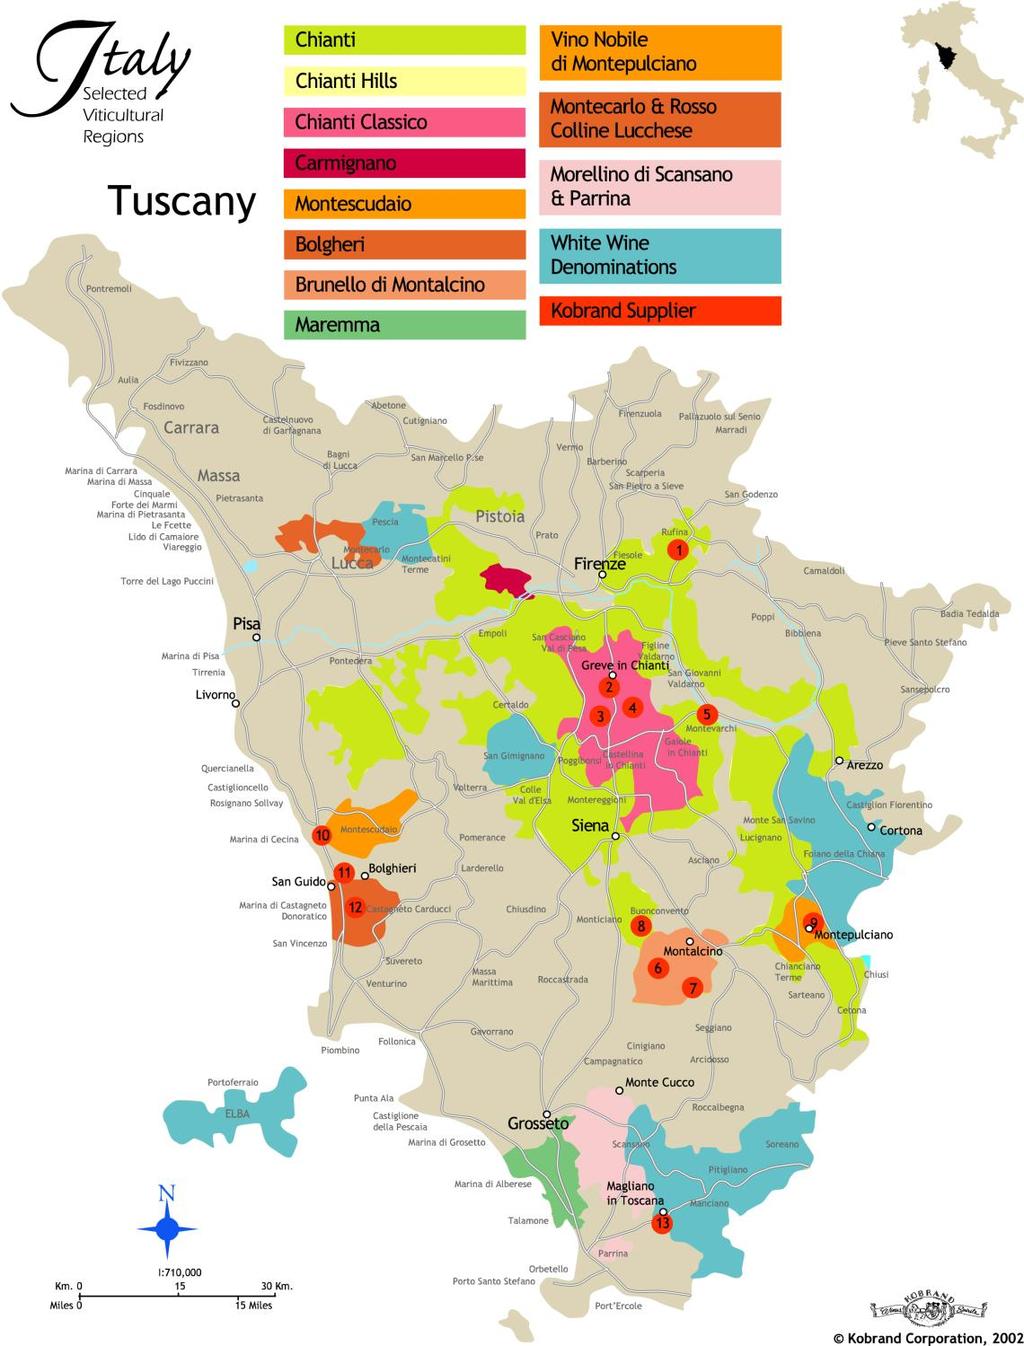 Geography of Cabernet Franc Tuscany Super Tuscans Vino da Tavola Originally outside of Italian law Maremma Maremma, once an open, disease-infested marsh, has only been considered a world-class wine